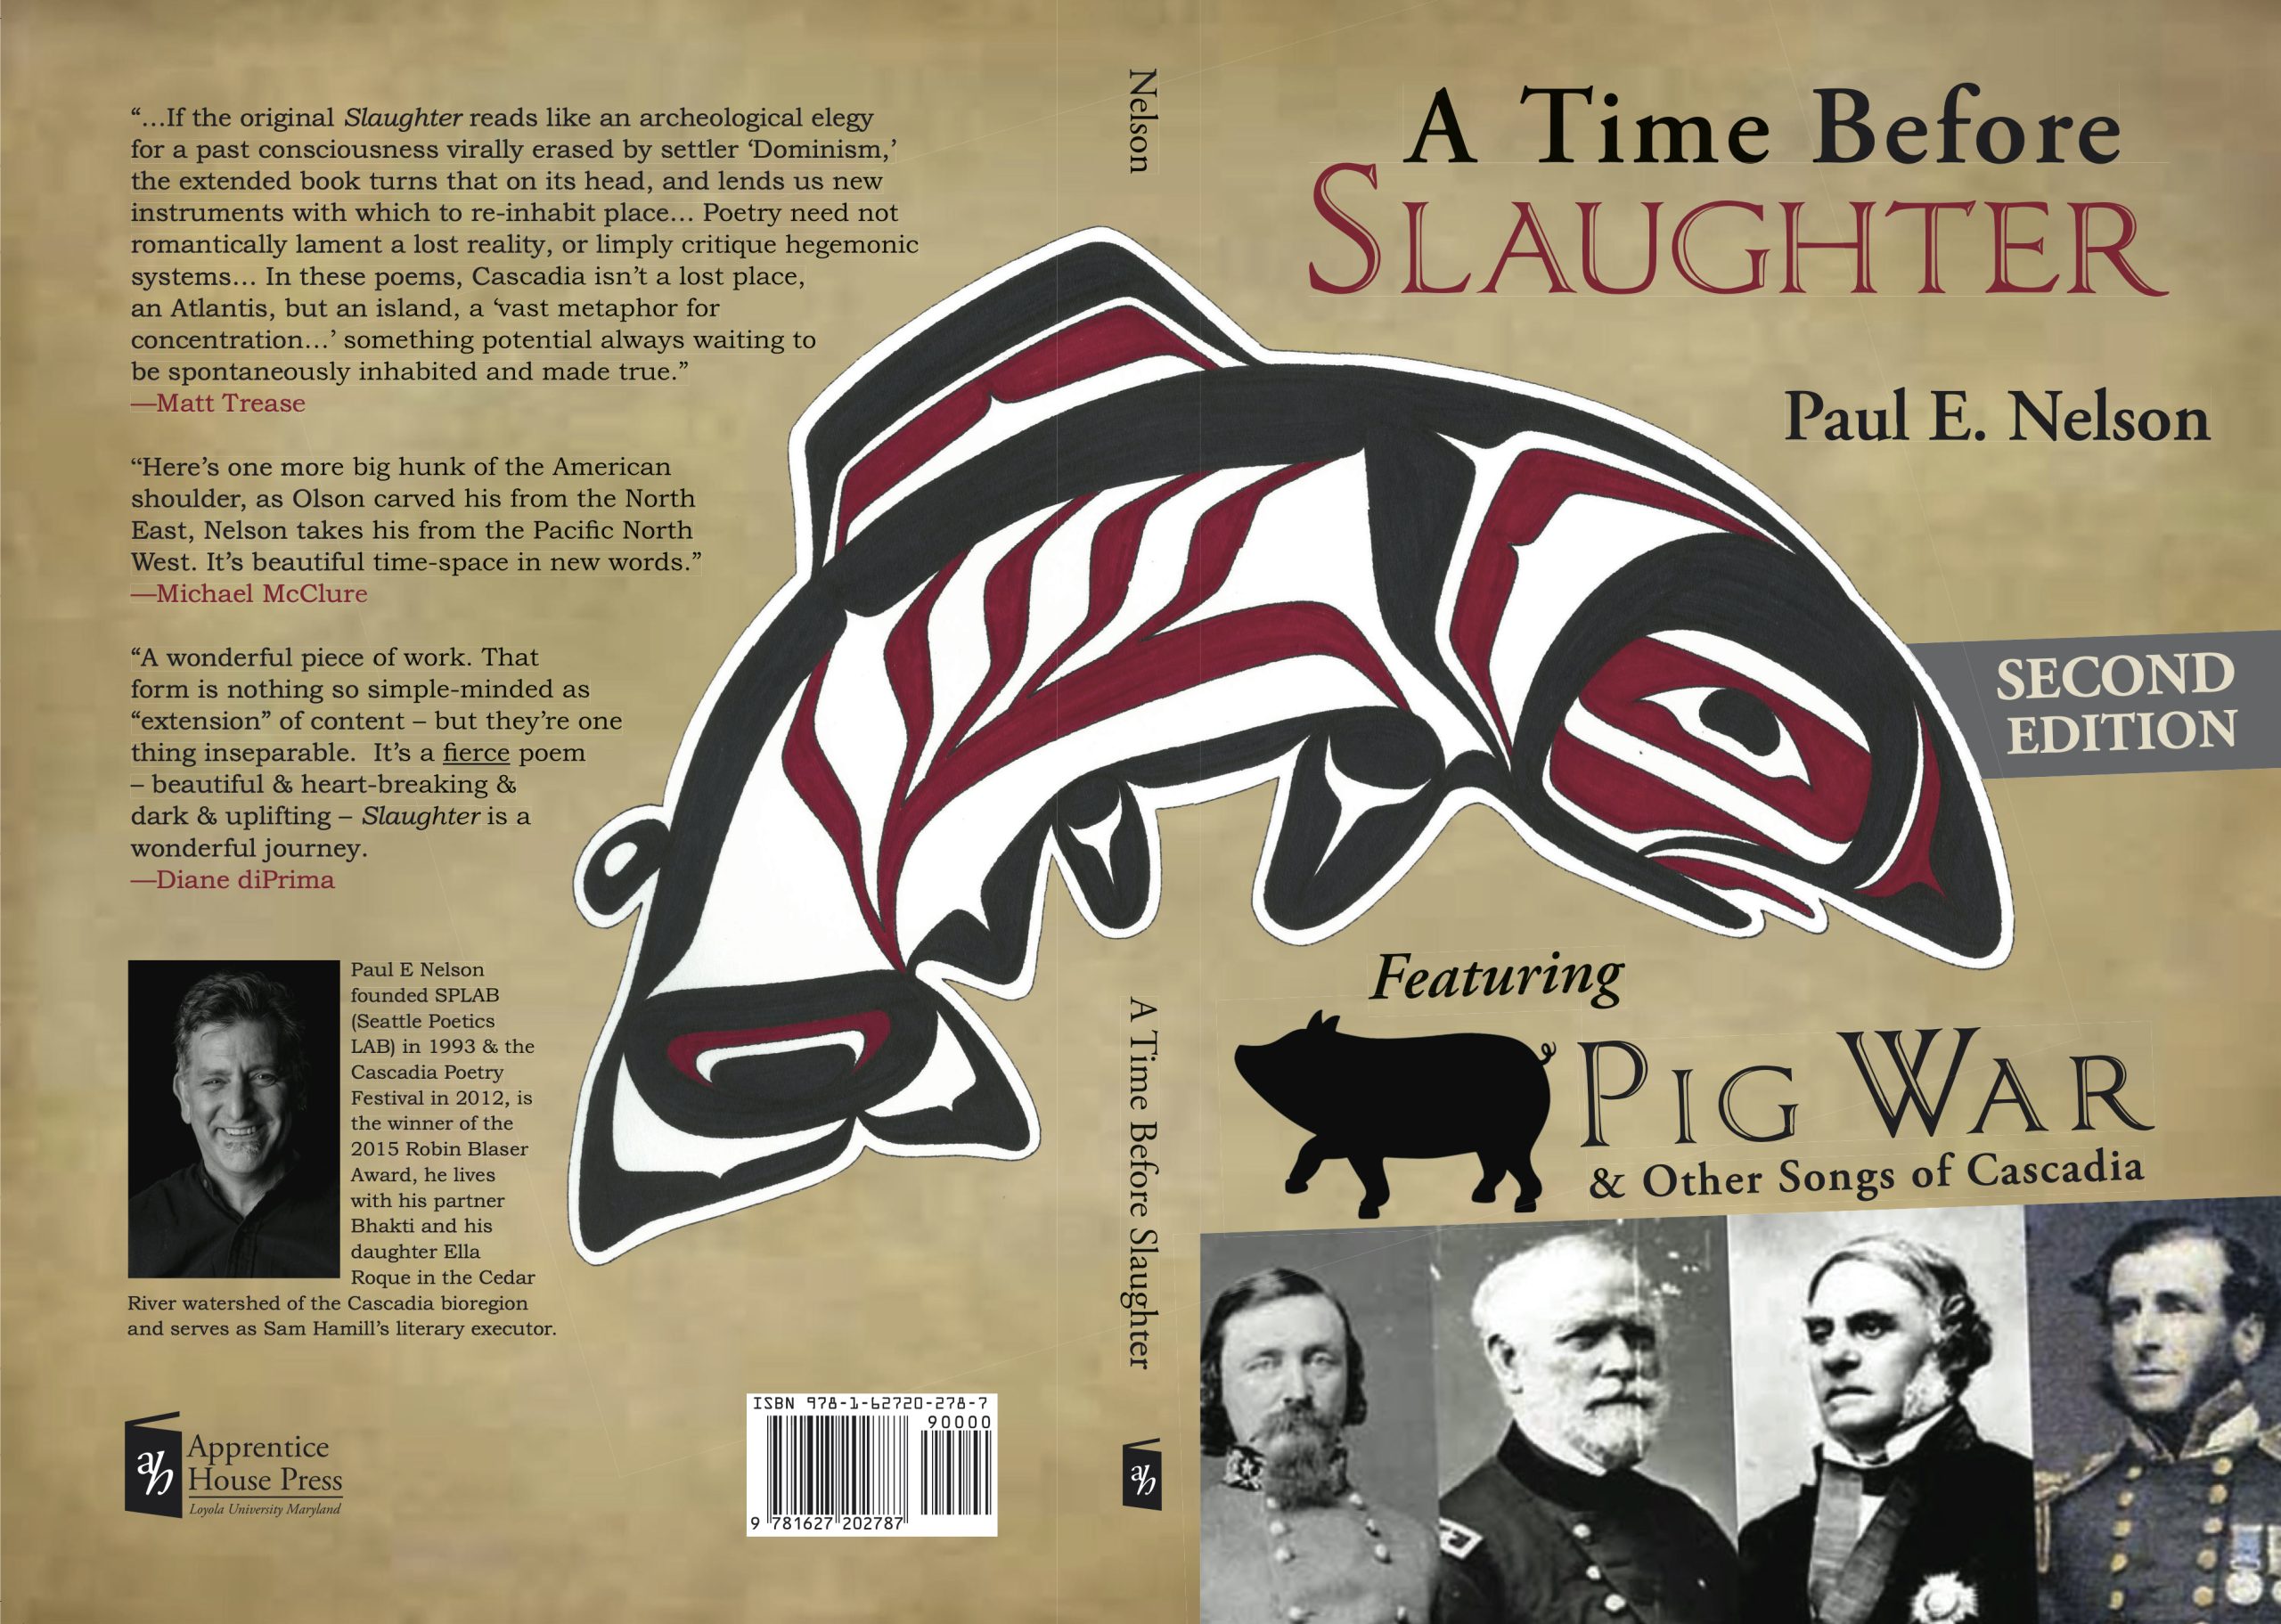 A Time Before Slaughter, book Jacket, by Paul E Nelson